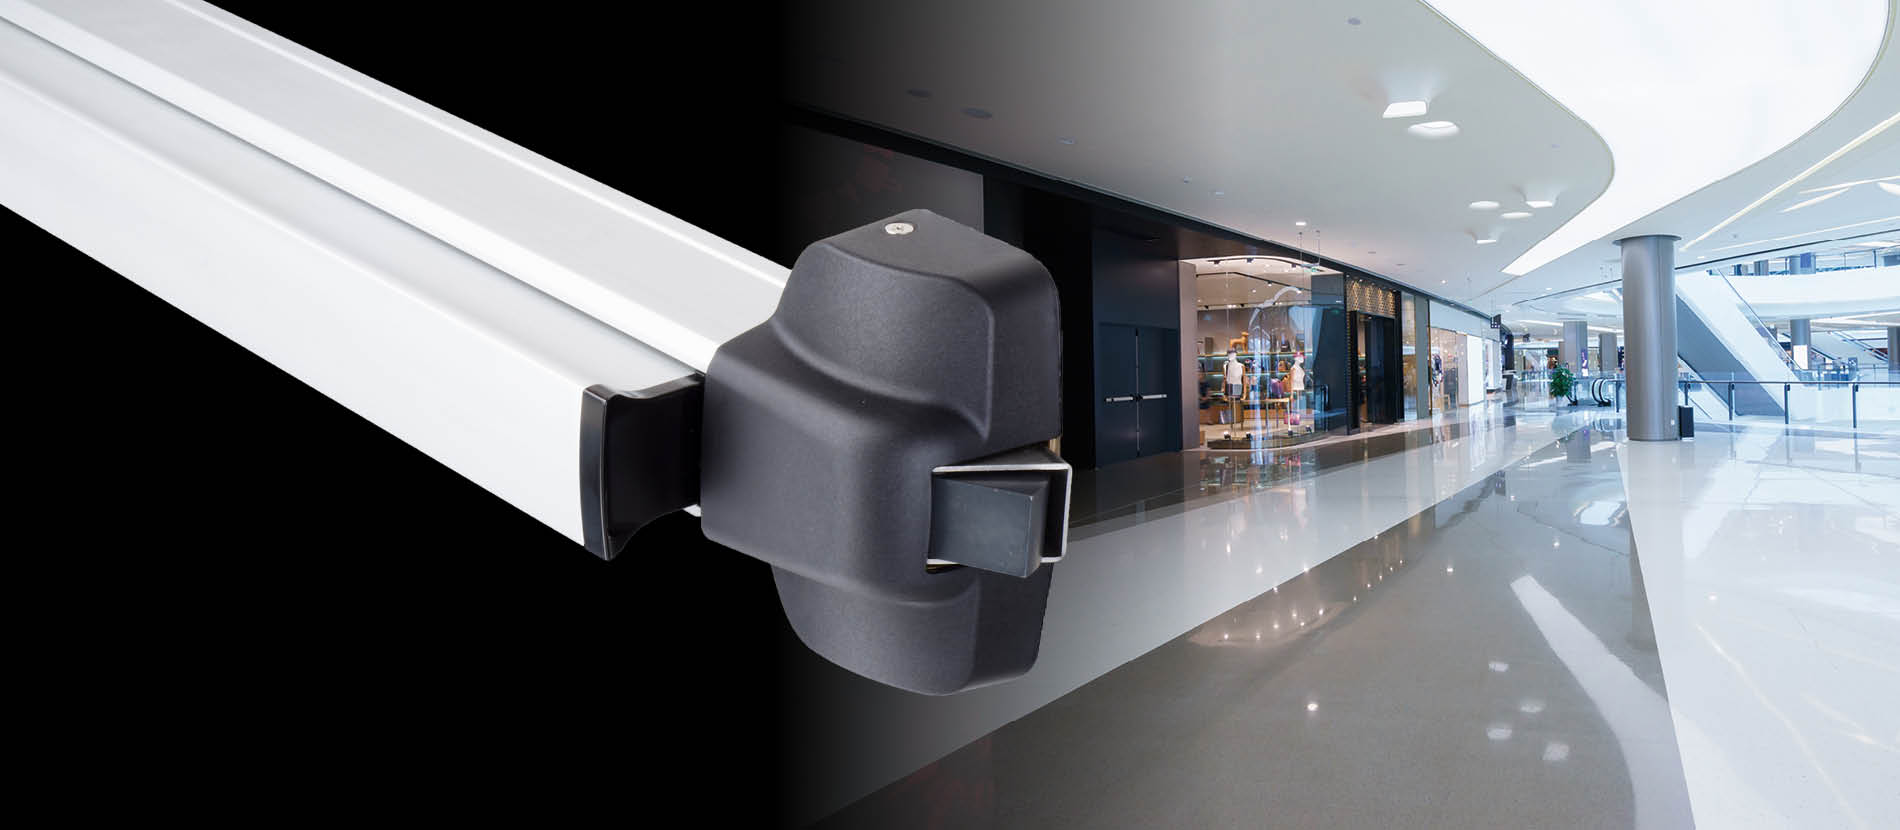 Klacci 30 Series Exit Devices shopping mall